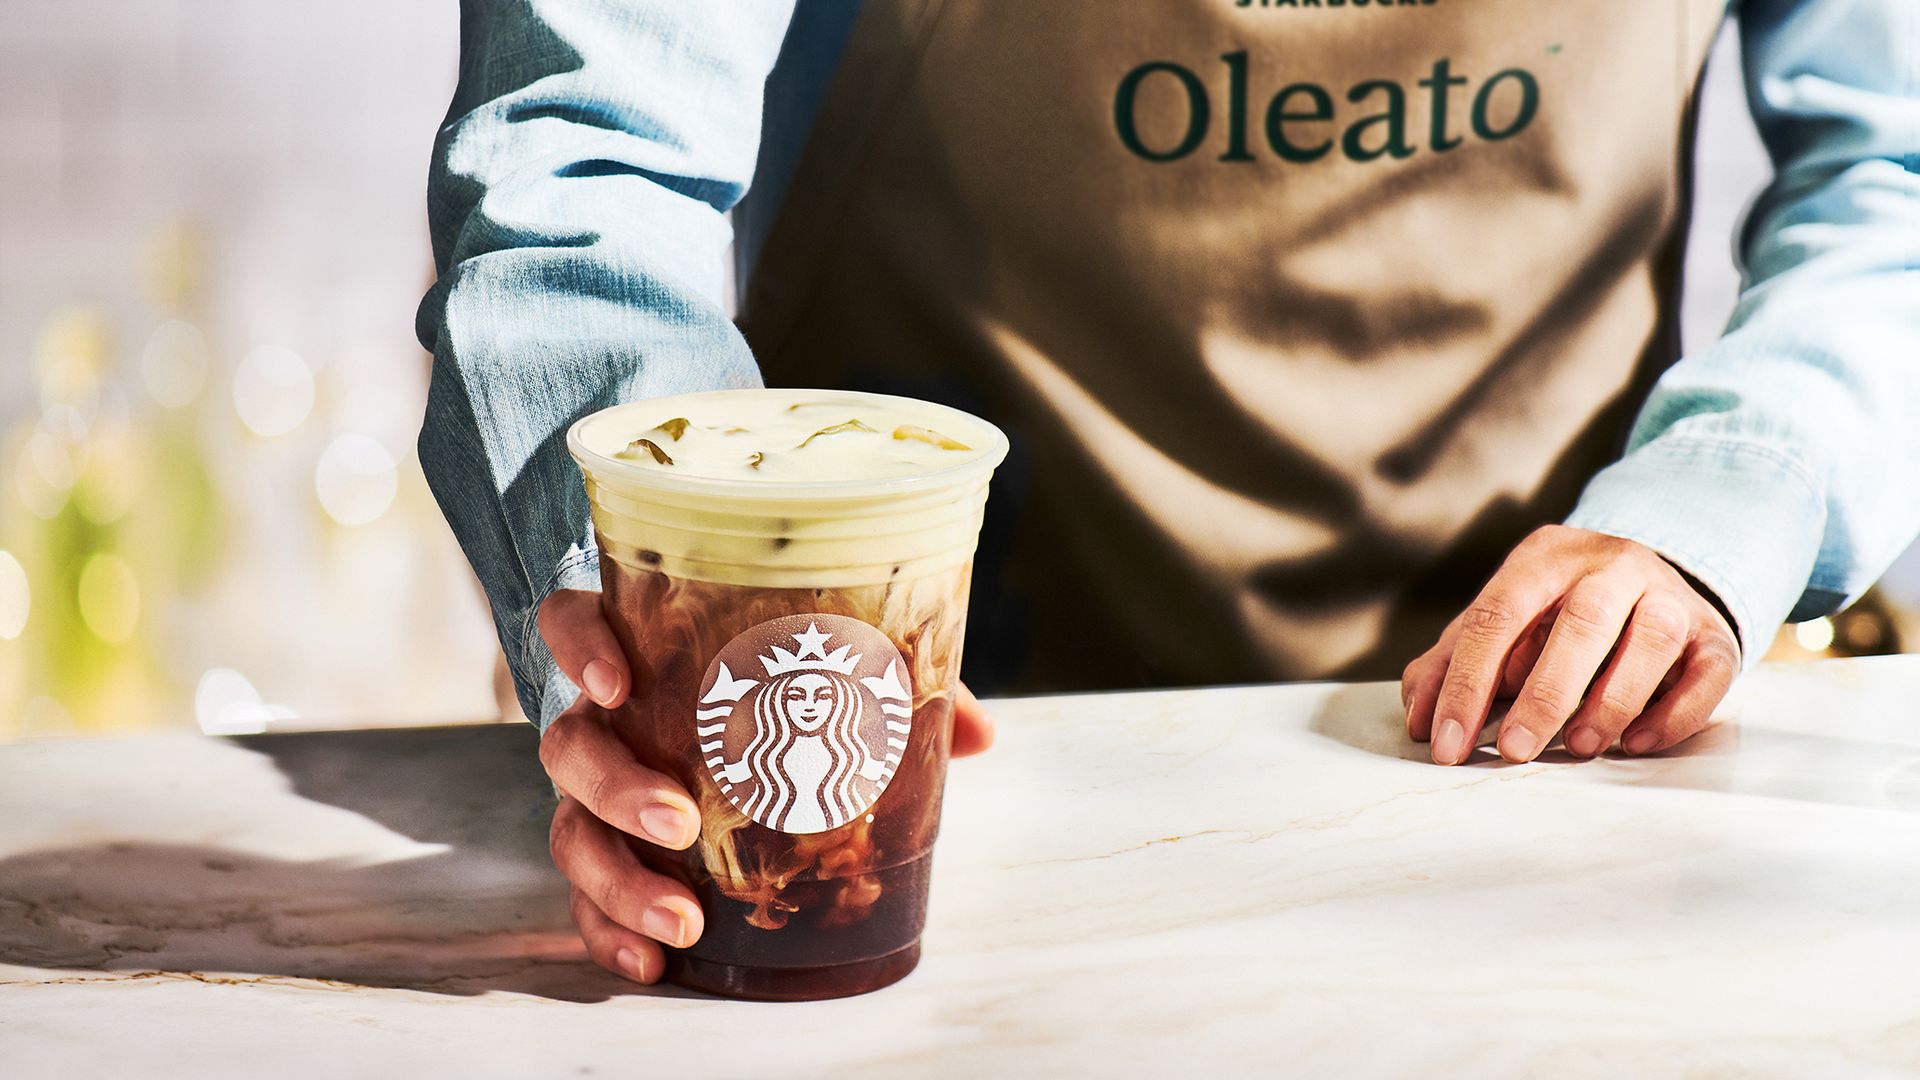 A person in an apron that says "Oleato" holding an iced coffee on a countertop.